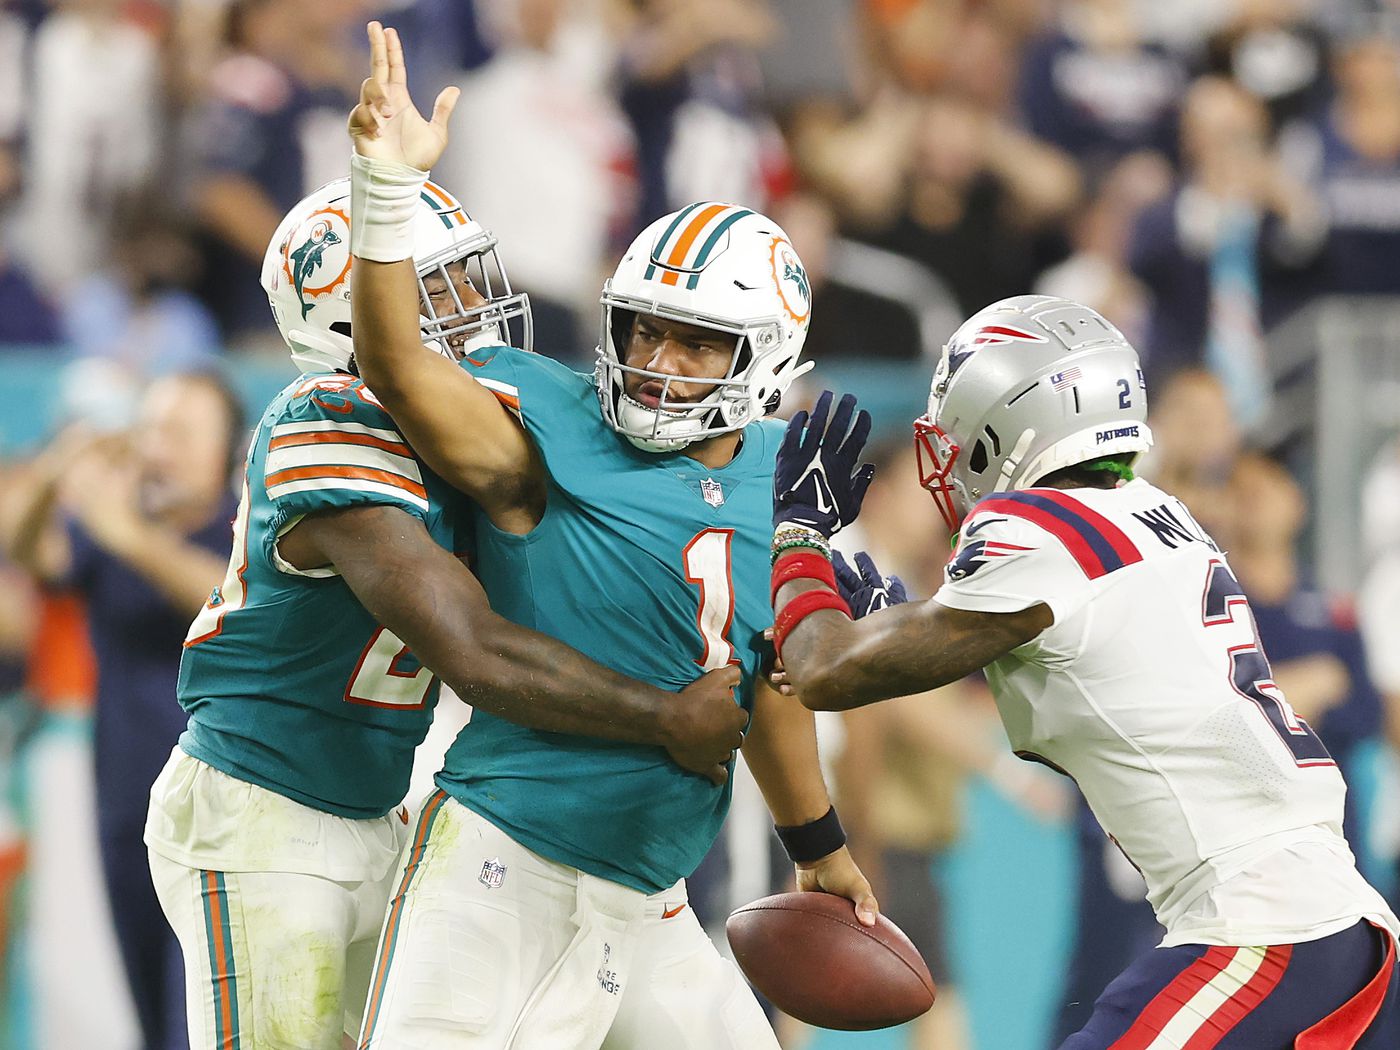 Miami Dolphins 2022 Schedule Dates Dolphins 2022 Schedule: Opponents Set For Next Year - The Phinsider